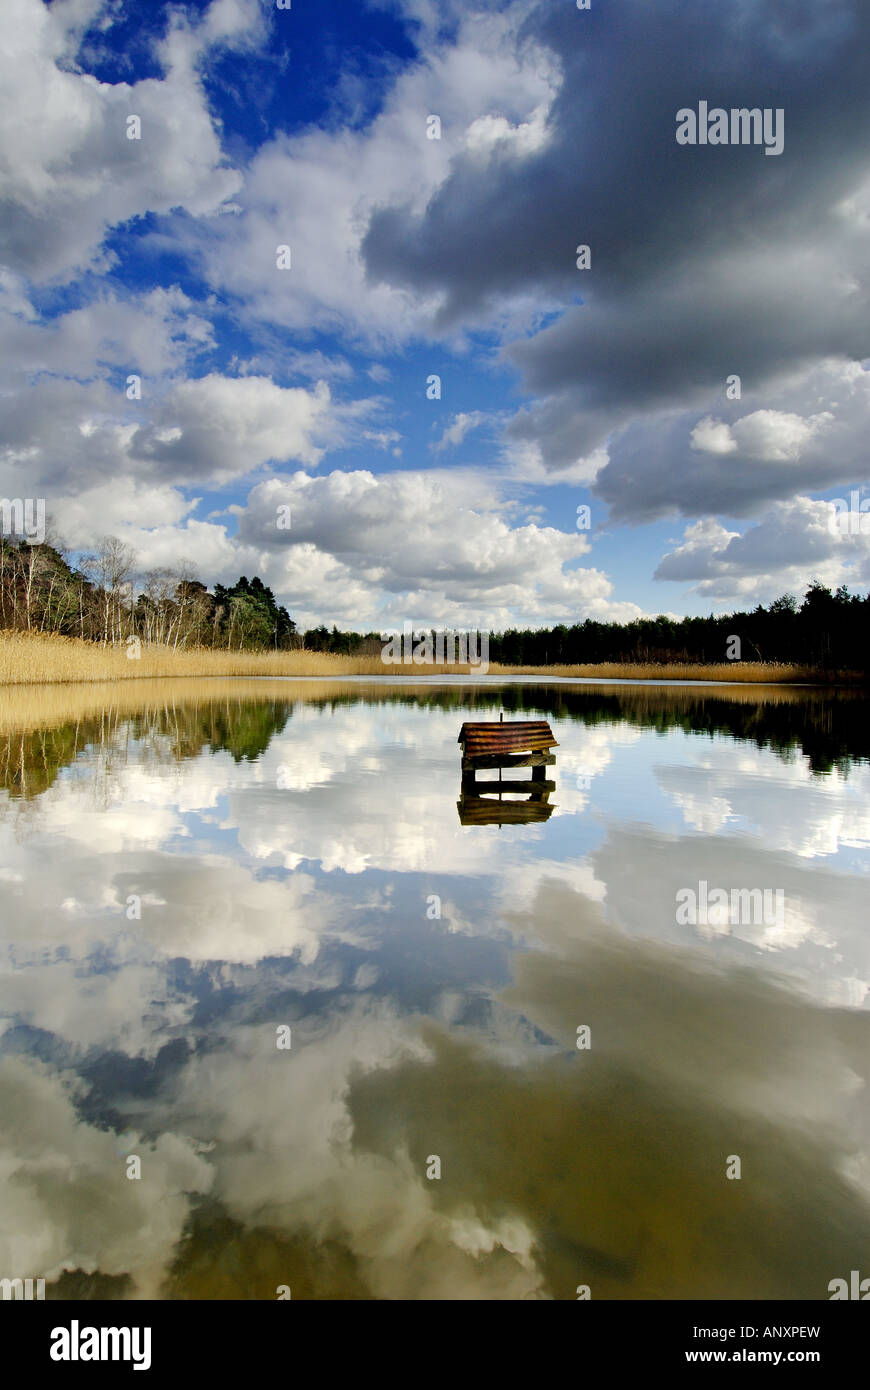 The cloudy sky reflected in a pond at Oxshott Woods in Surrey. Stock Photo